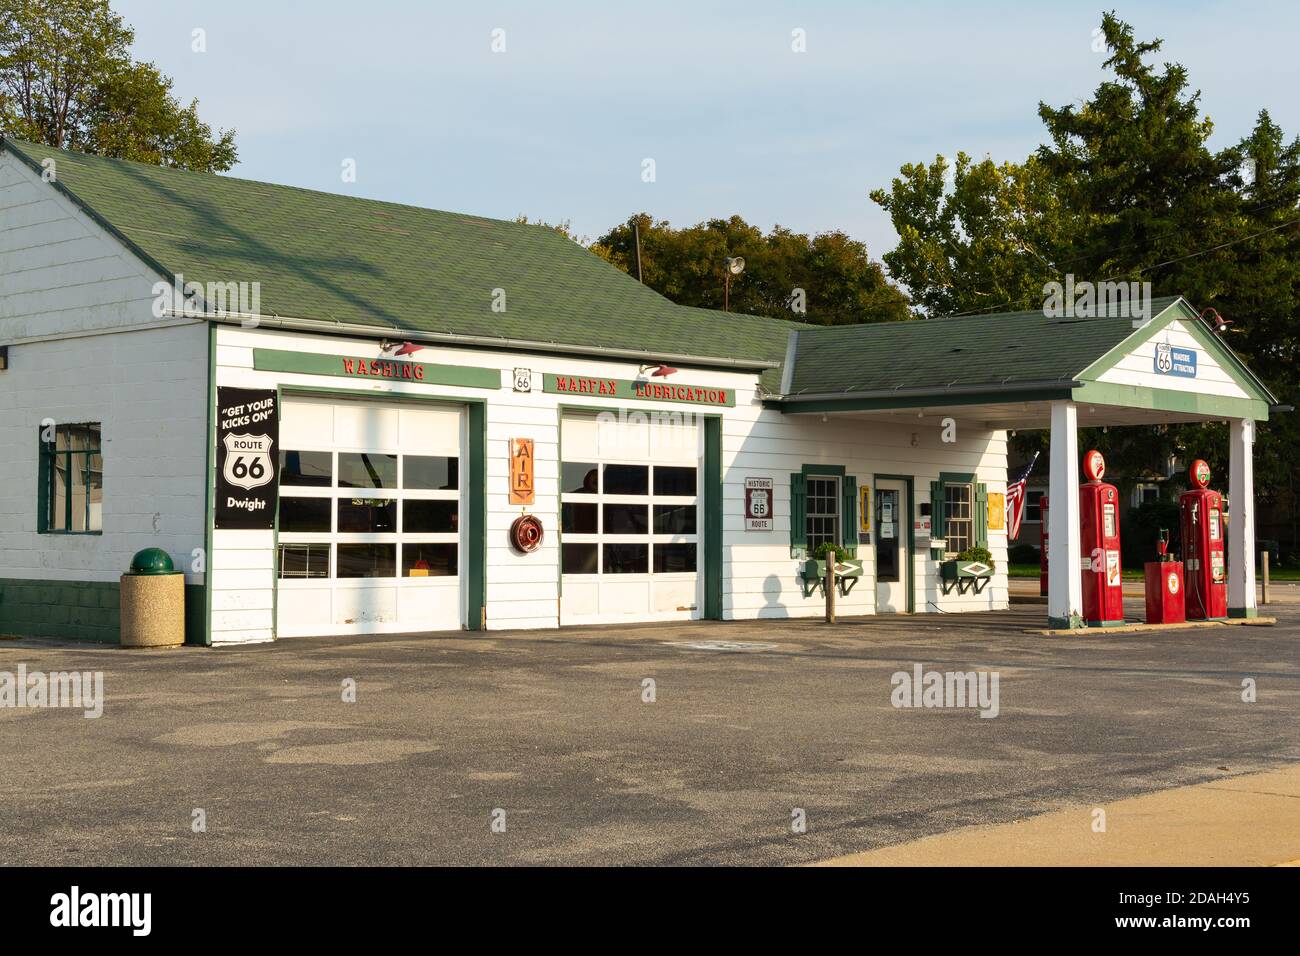 Dwight, Illinois / United States - September 23rd, 2020 - Old gas station on Historic Route 66 in late afternoon light. Stock Photo